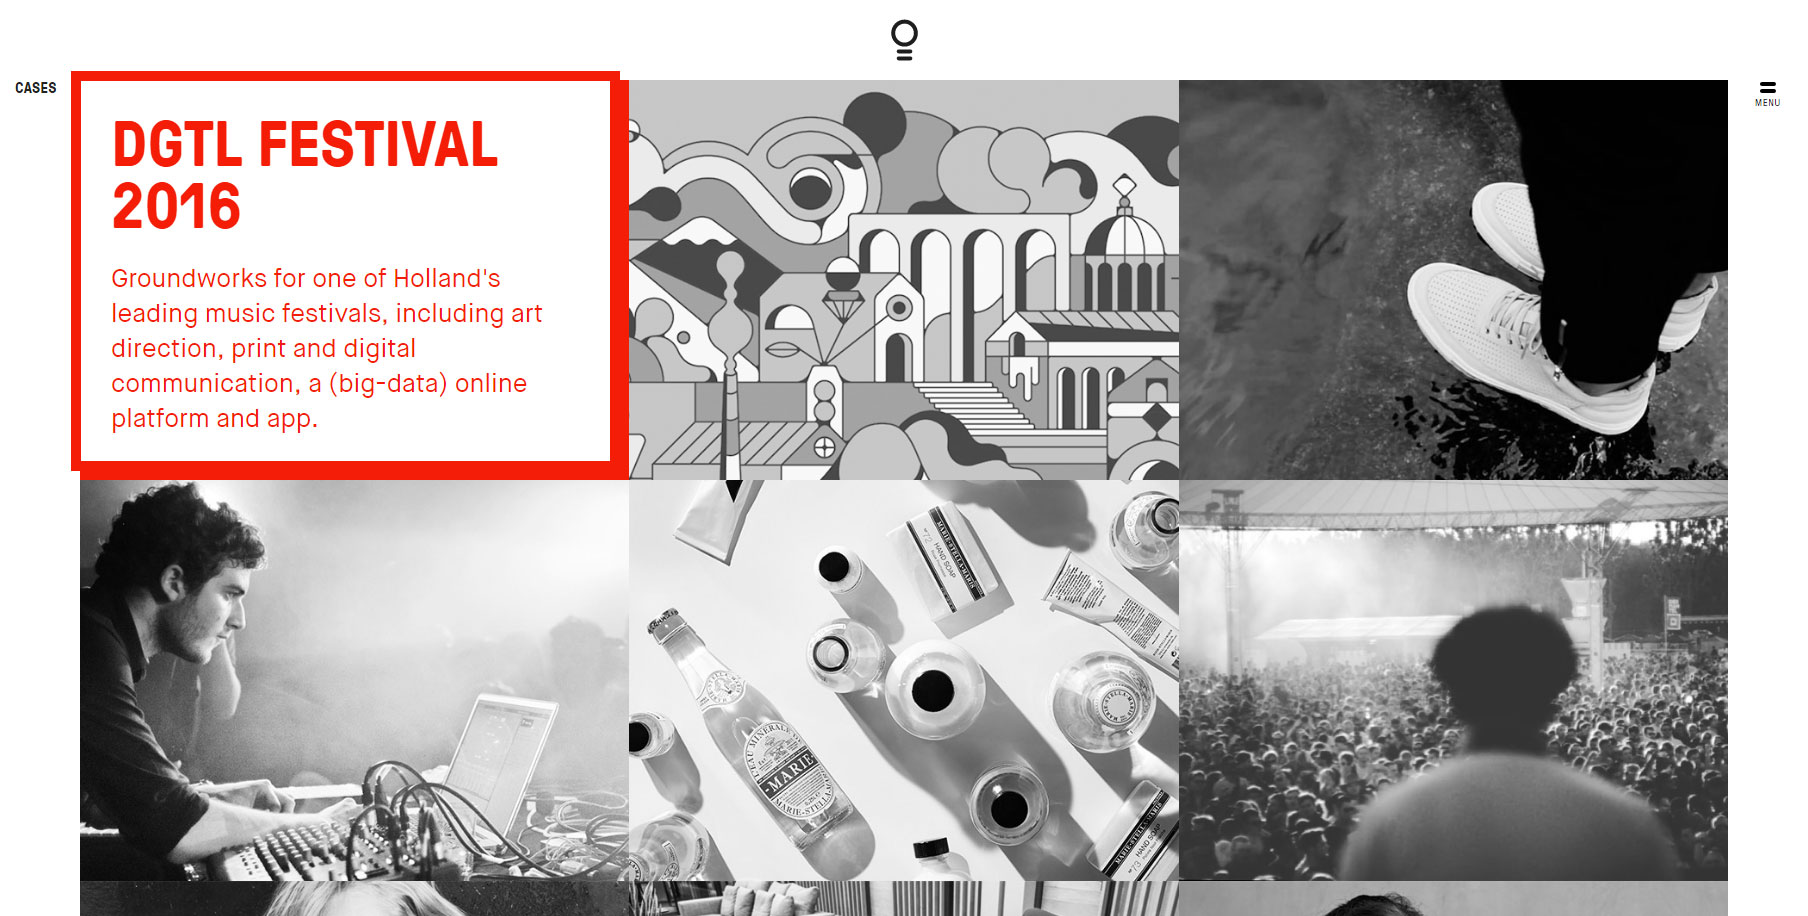 Bolden - Website of the Day